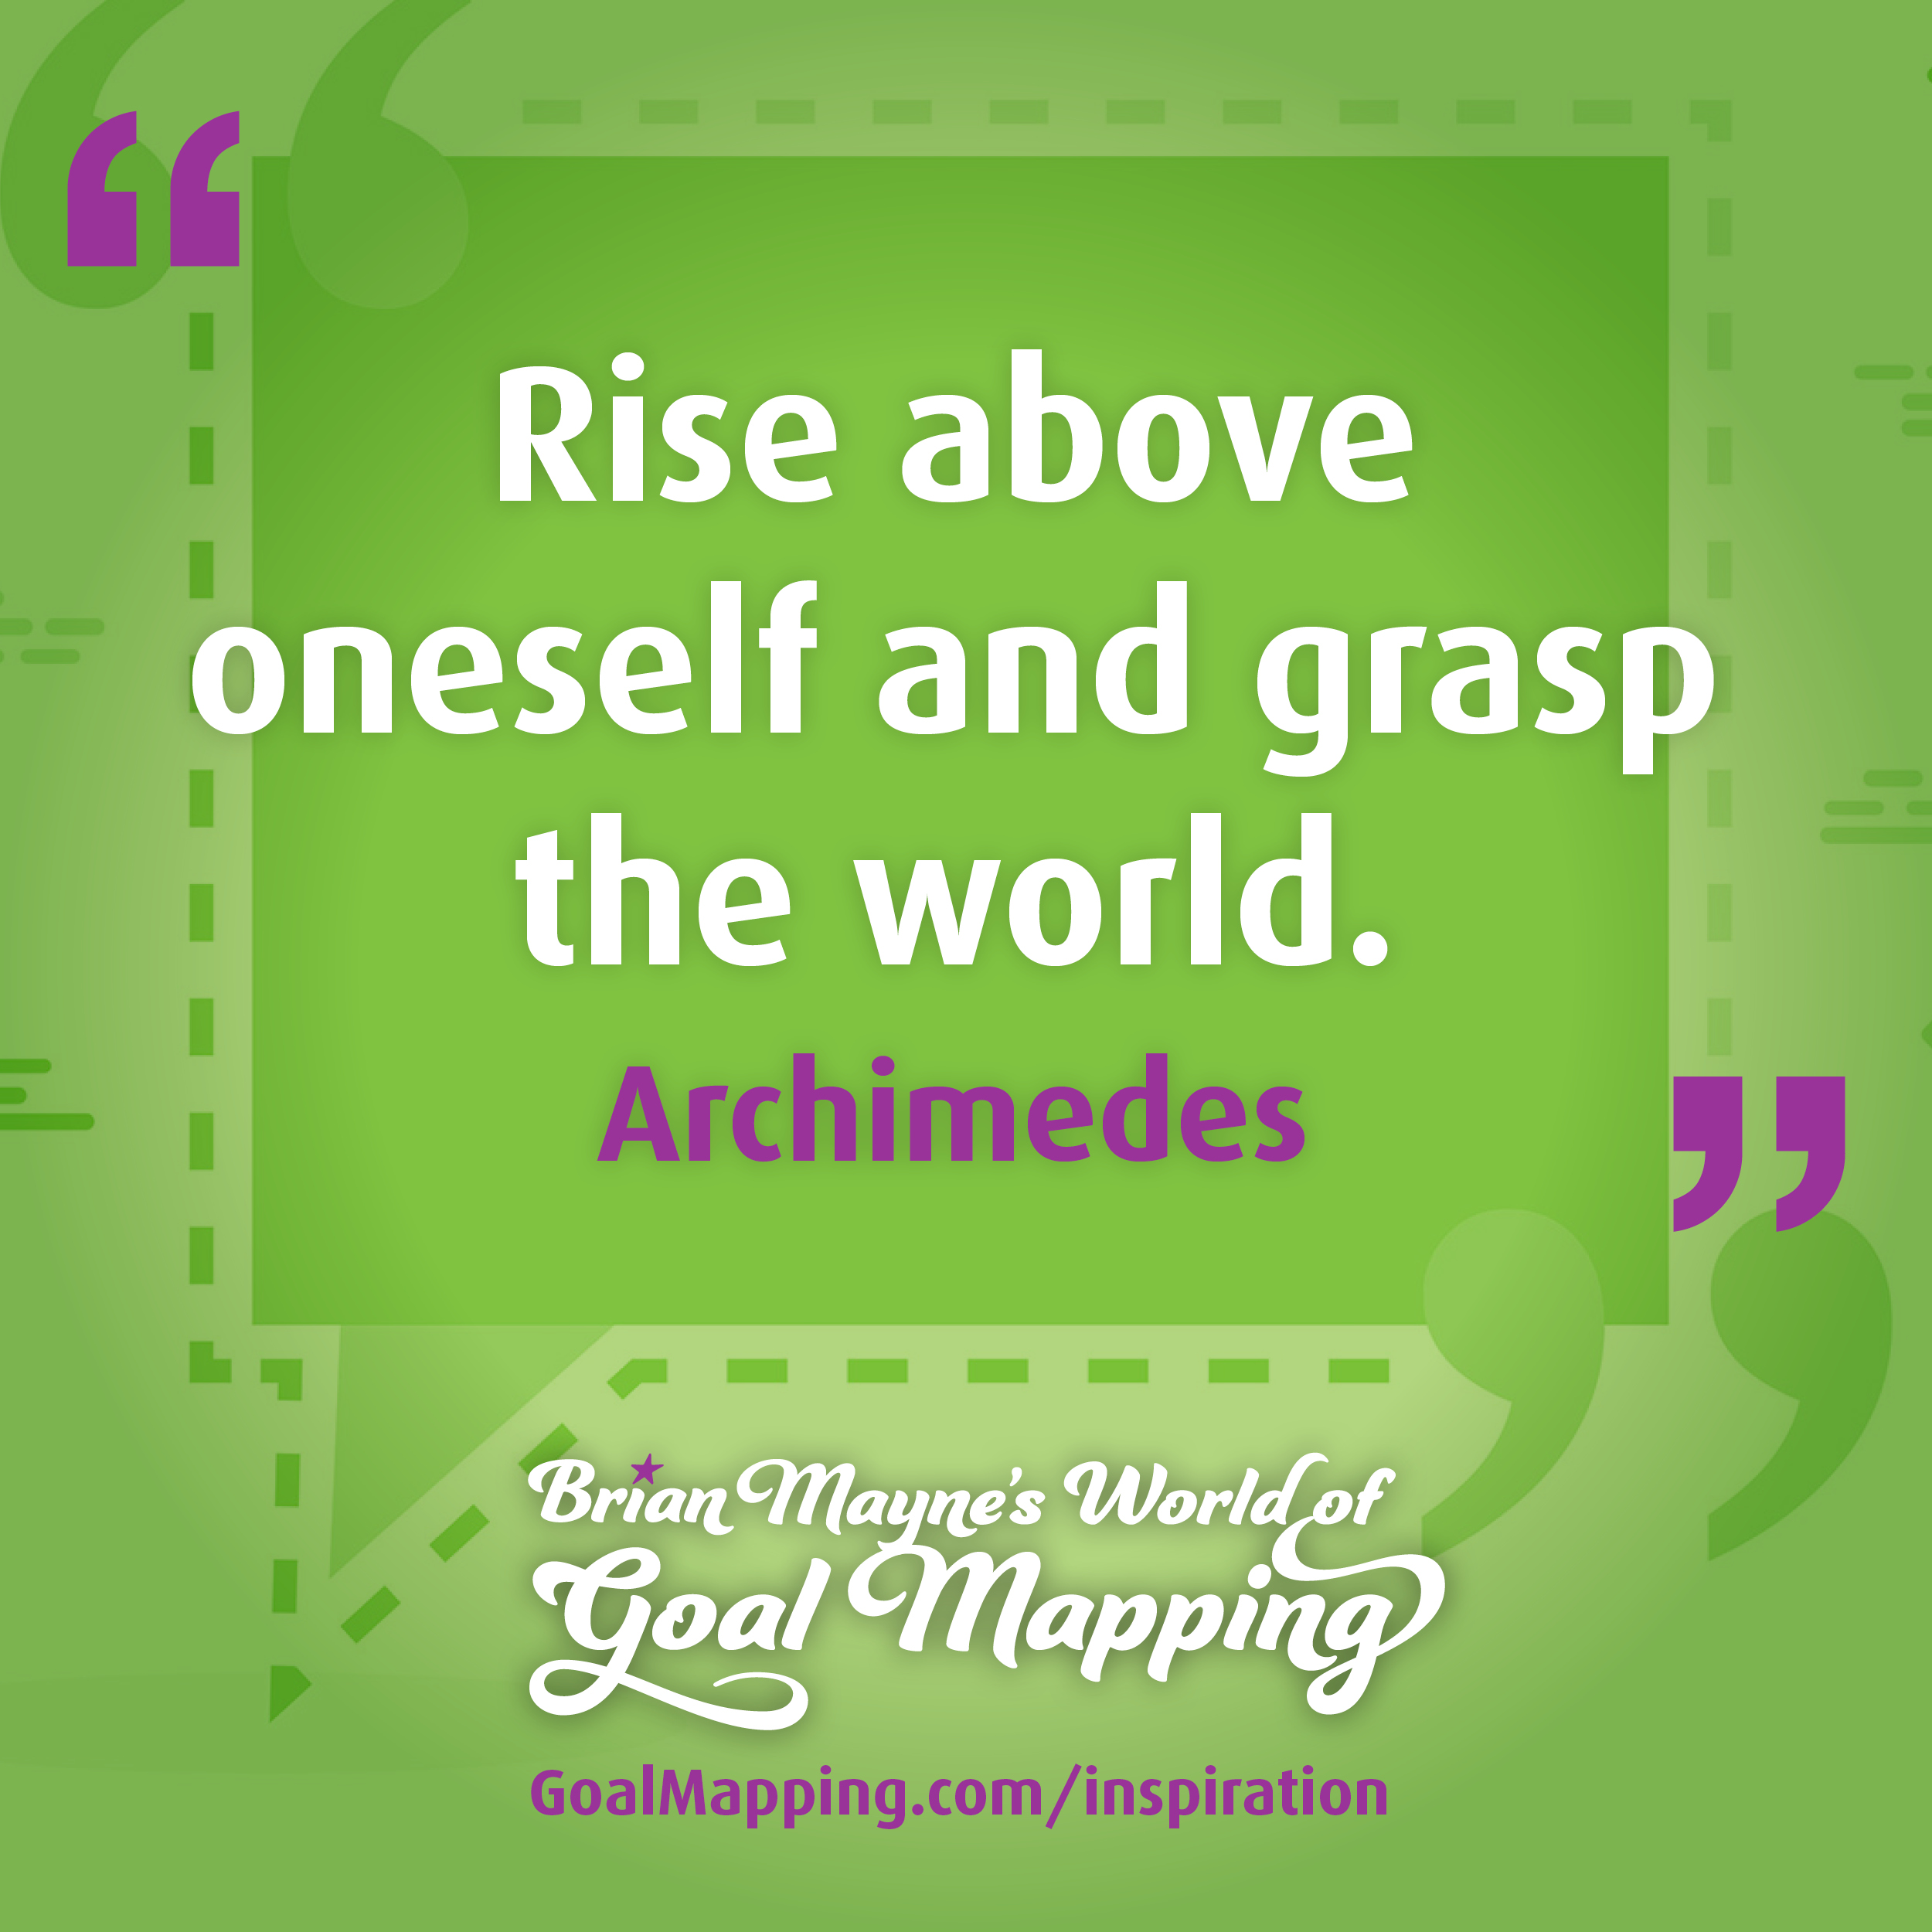 "Rise above oneself and grasp the world." Archimedes